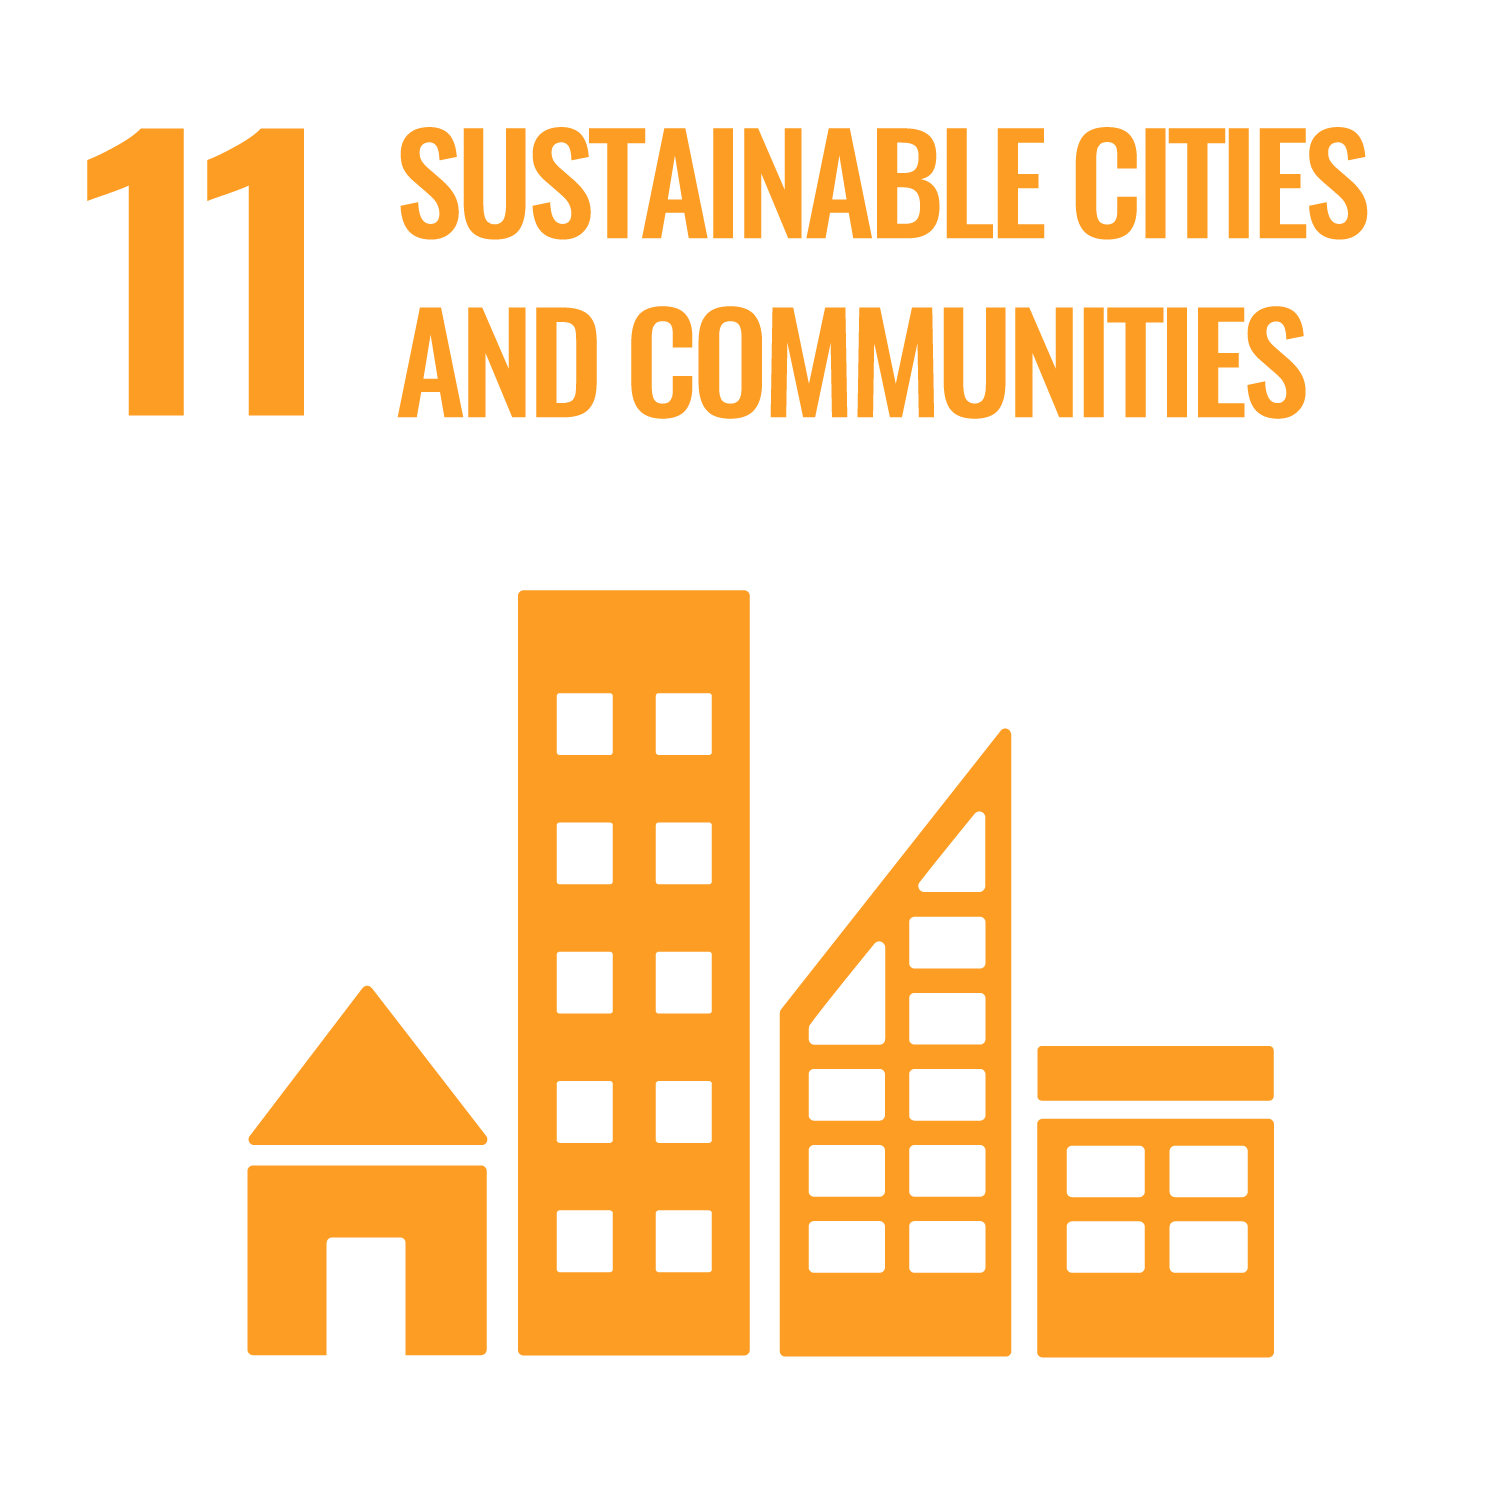 Image for Sustainable Cities and Communities Sustainable Development Goal